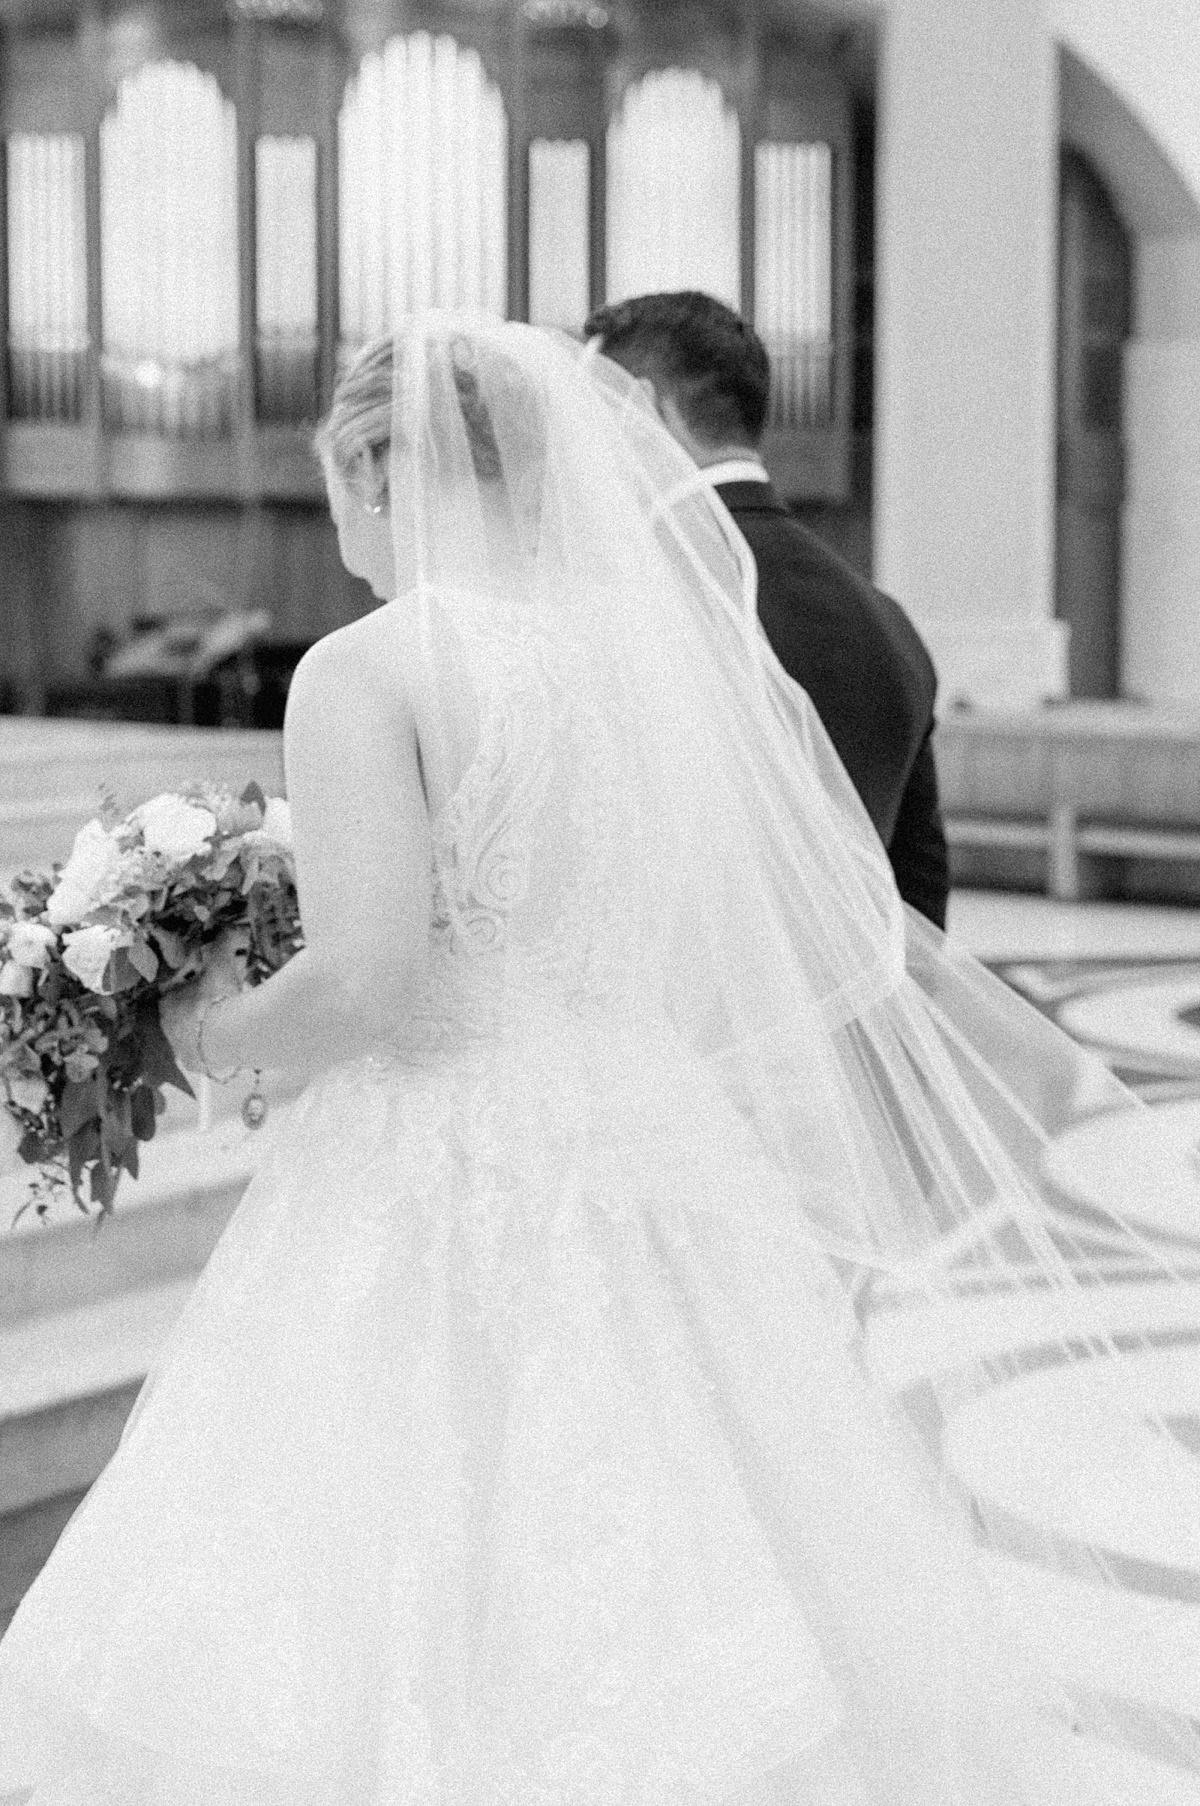 black and white photo of a groom helping his bride up the alter steps